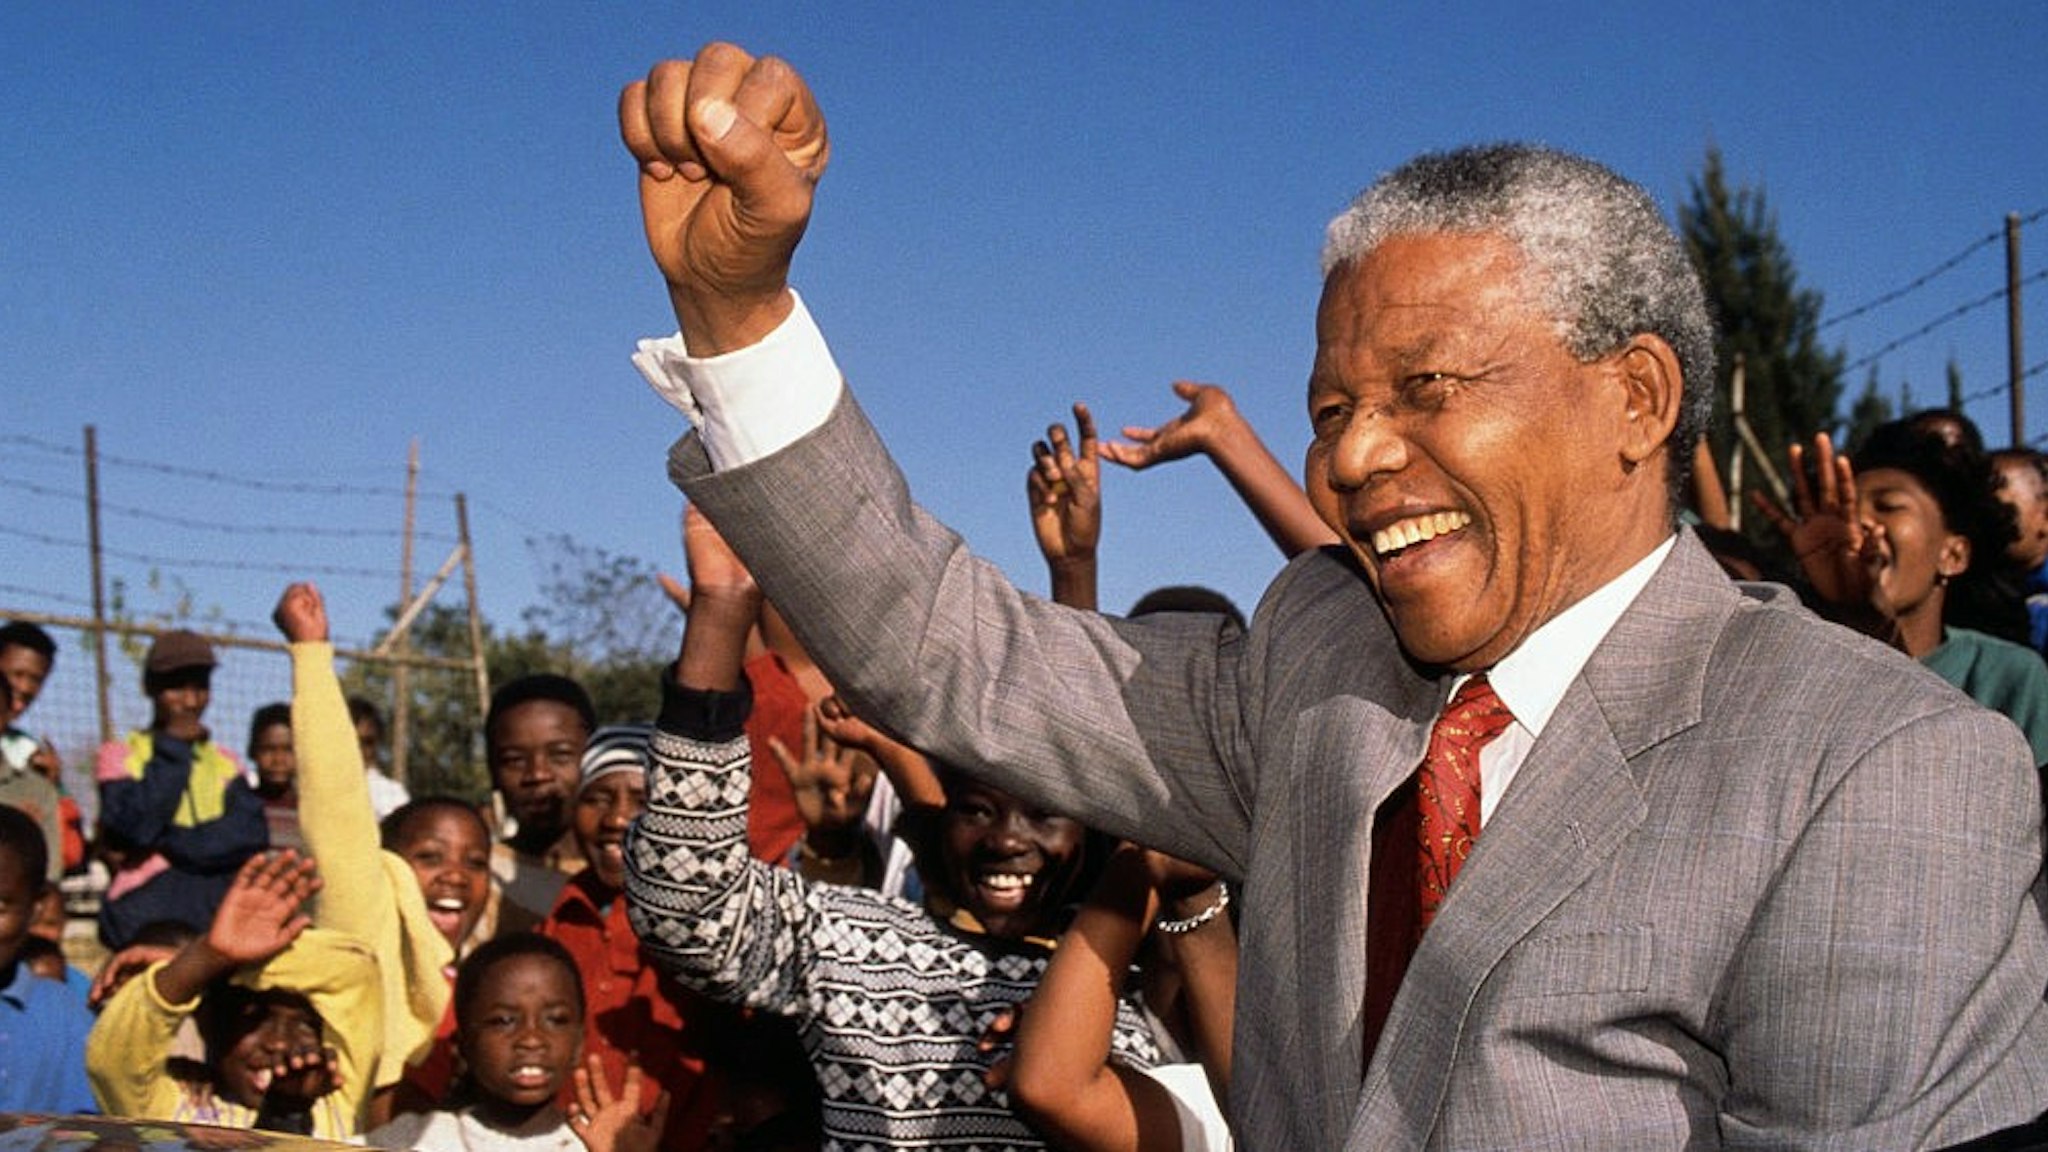 (Original Caption) Johannesburg, South Africa: Nelson Mandela visits Hlengiwe School to encourage students to learn - Former President of South Africa and longtime political prisoner, held by the Apartheid based government from 1964-1990 for sabotage. With the coming of a freer political climate, Mandela was released from his life sentence at Victor Vester Prison on February 11, of 1990. He went on to lead the African National Congress in negotiations with President F.W. de Klerk, that resulted in the end of Apartheid and full citizenship for all South Africans. He and de Klerk received a joint Nobel Peace Prize in 1993 for their efforts. Mandela was elected president in 1994. (Photo by ©